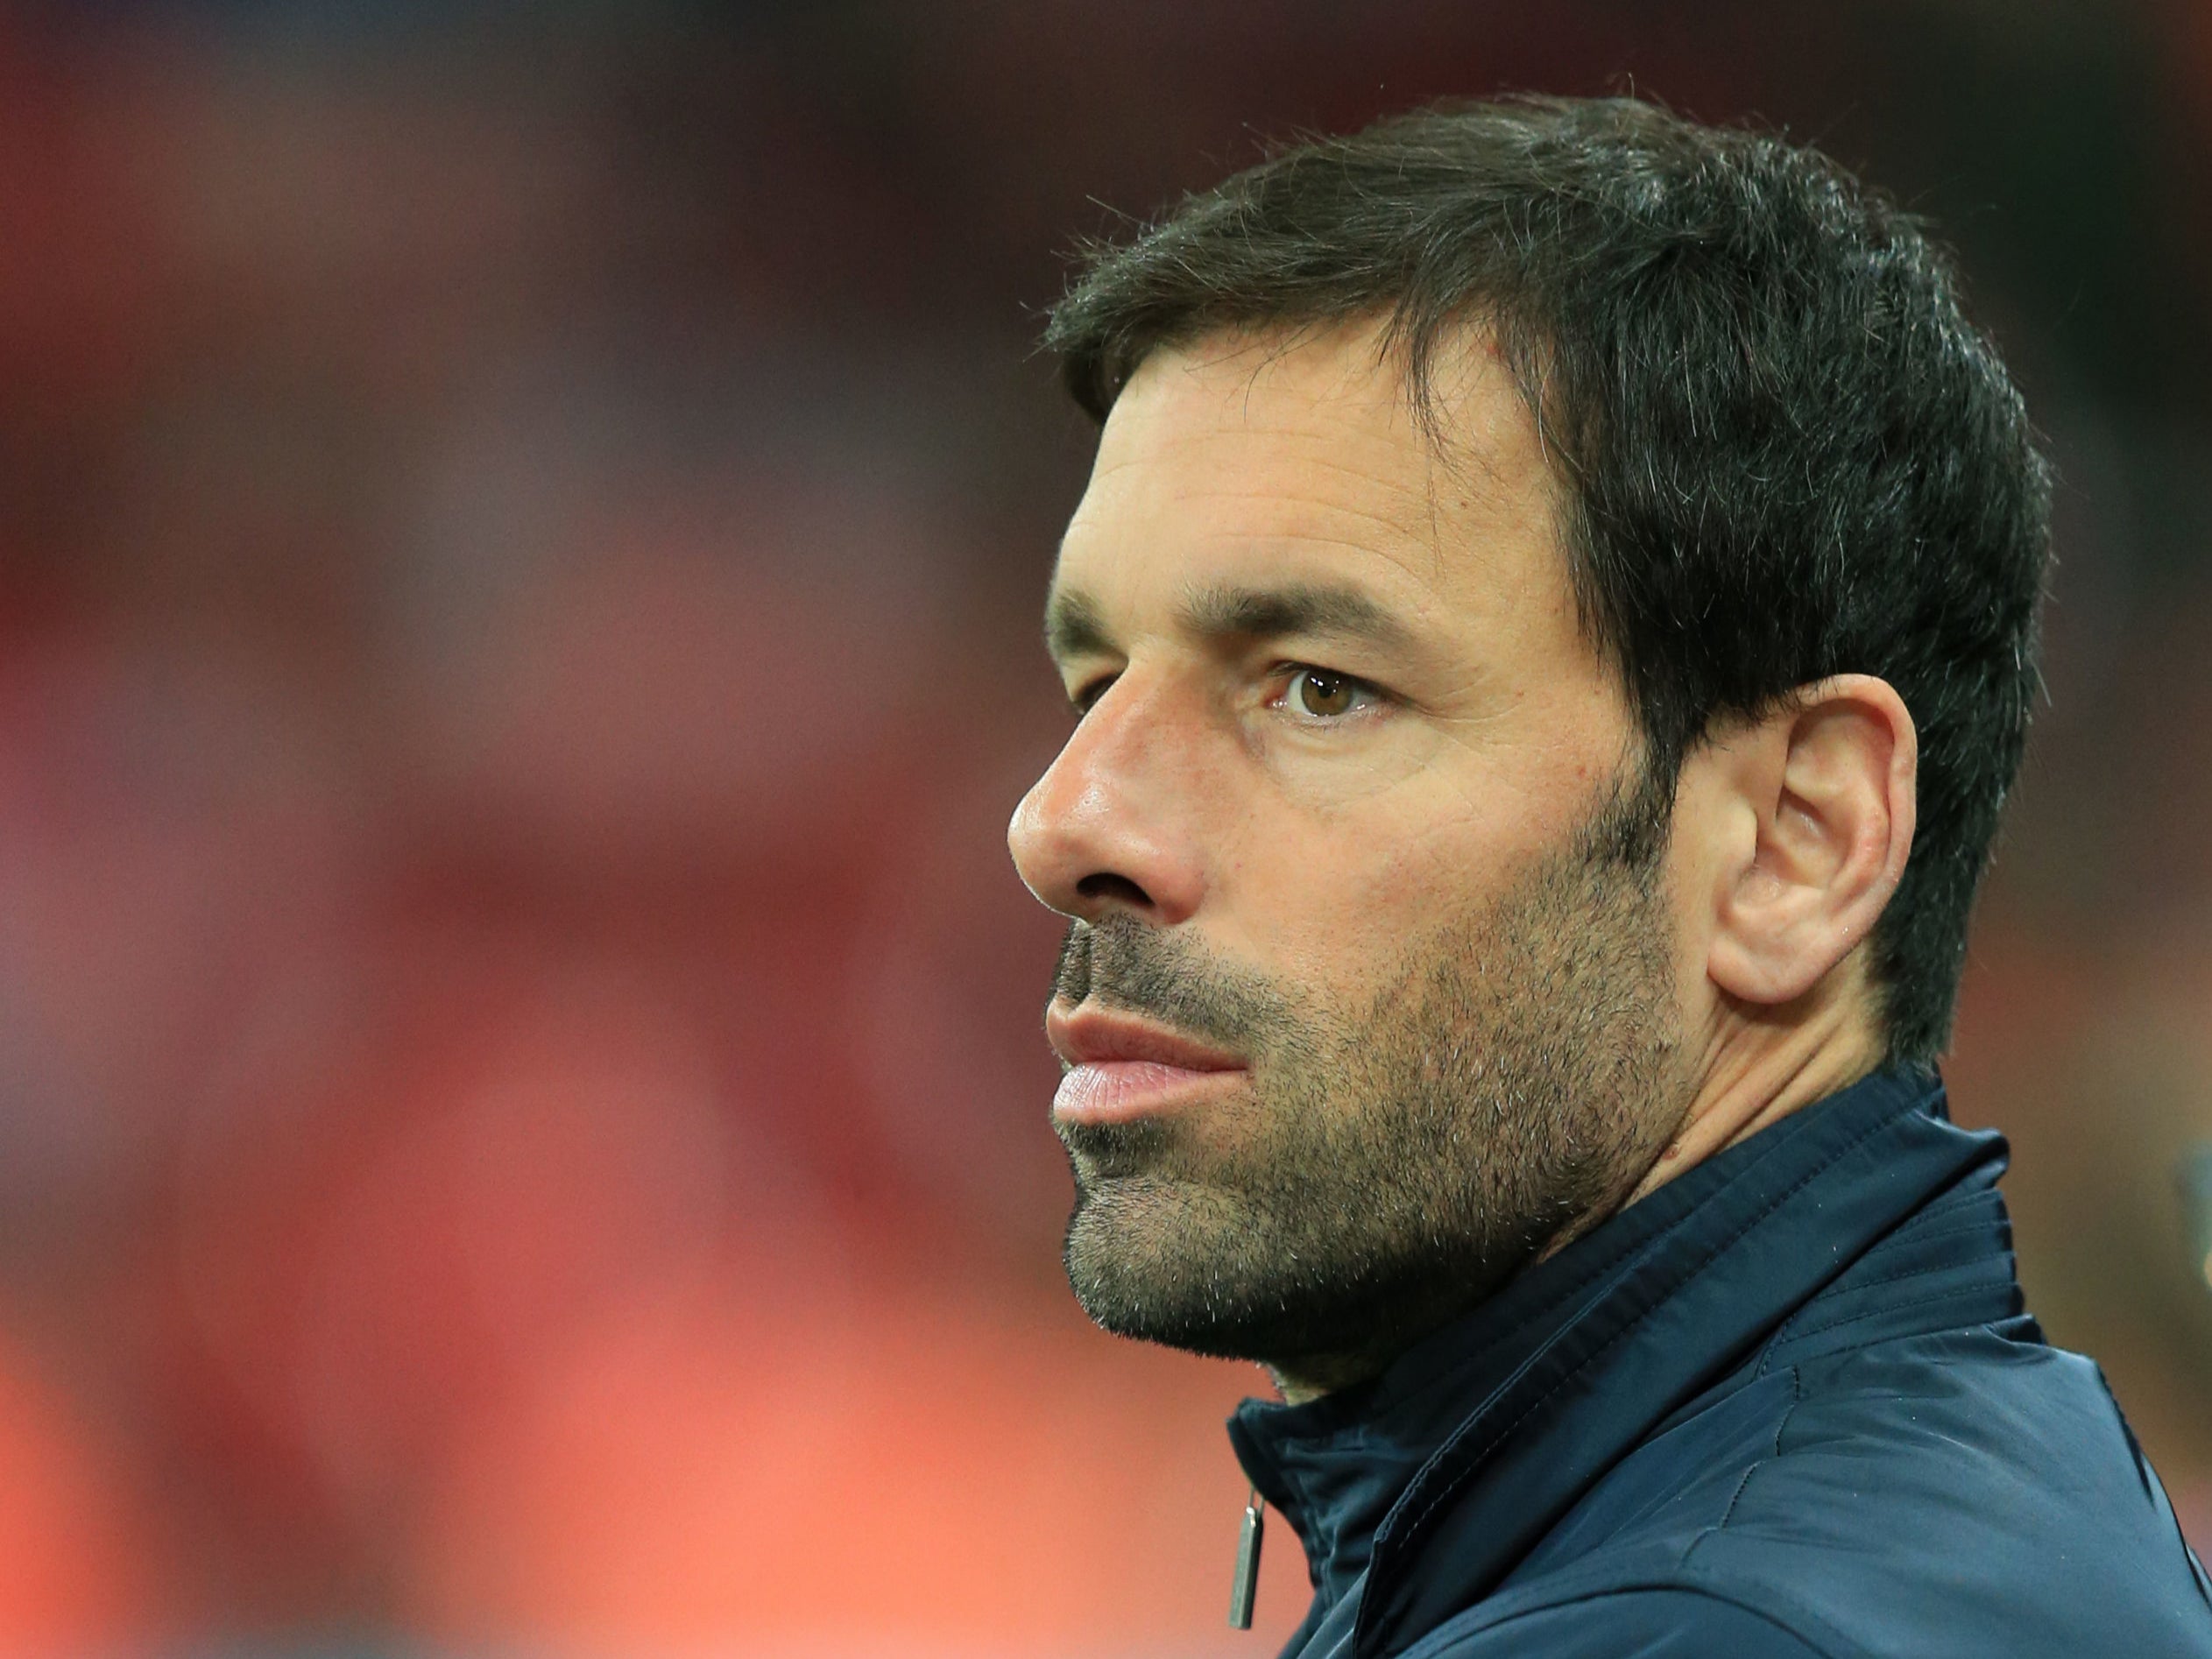 Ruud Van Nistelrooy, who has signed a three-year deal to become PSV's manager from this summer